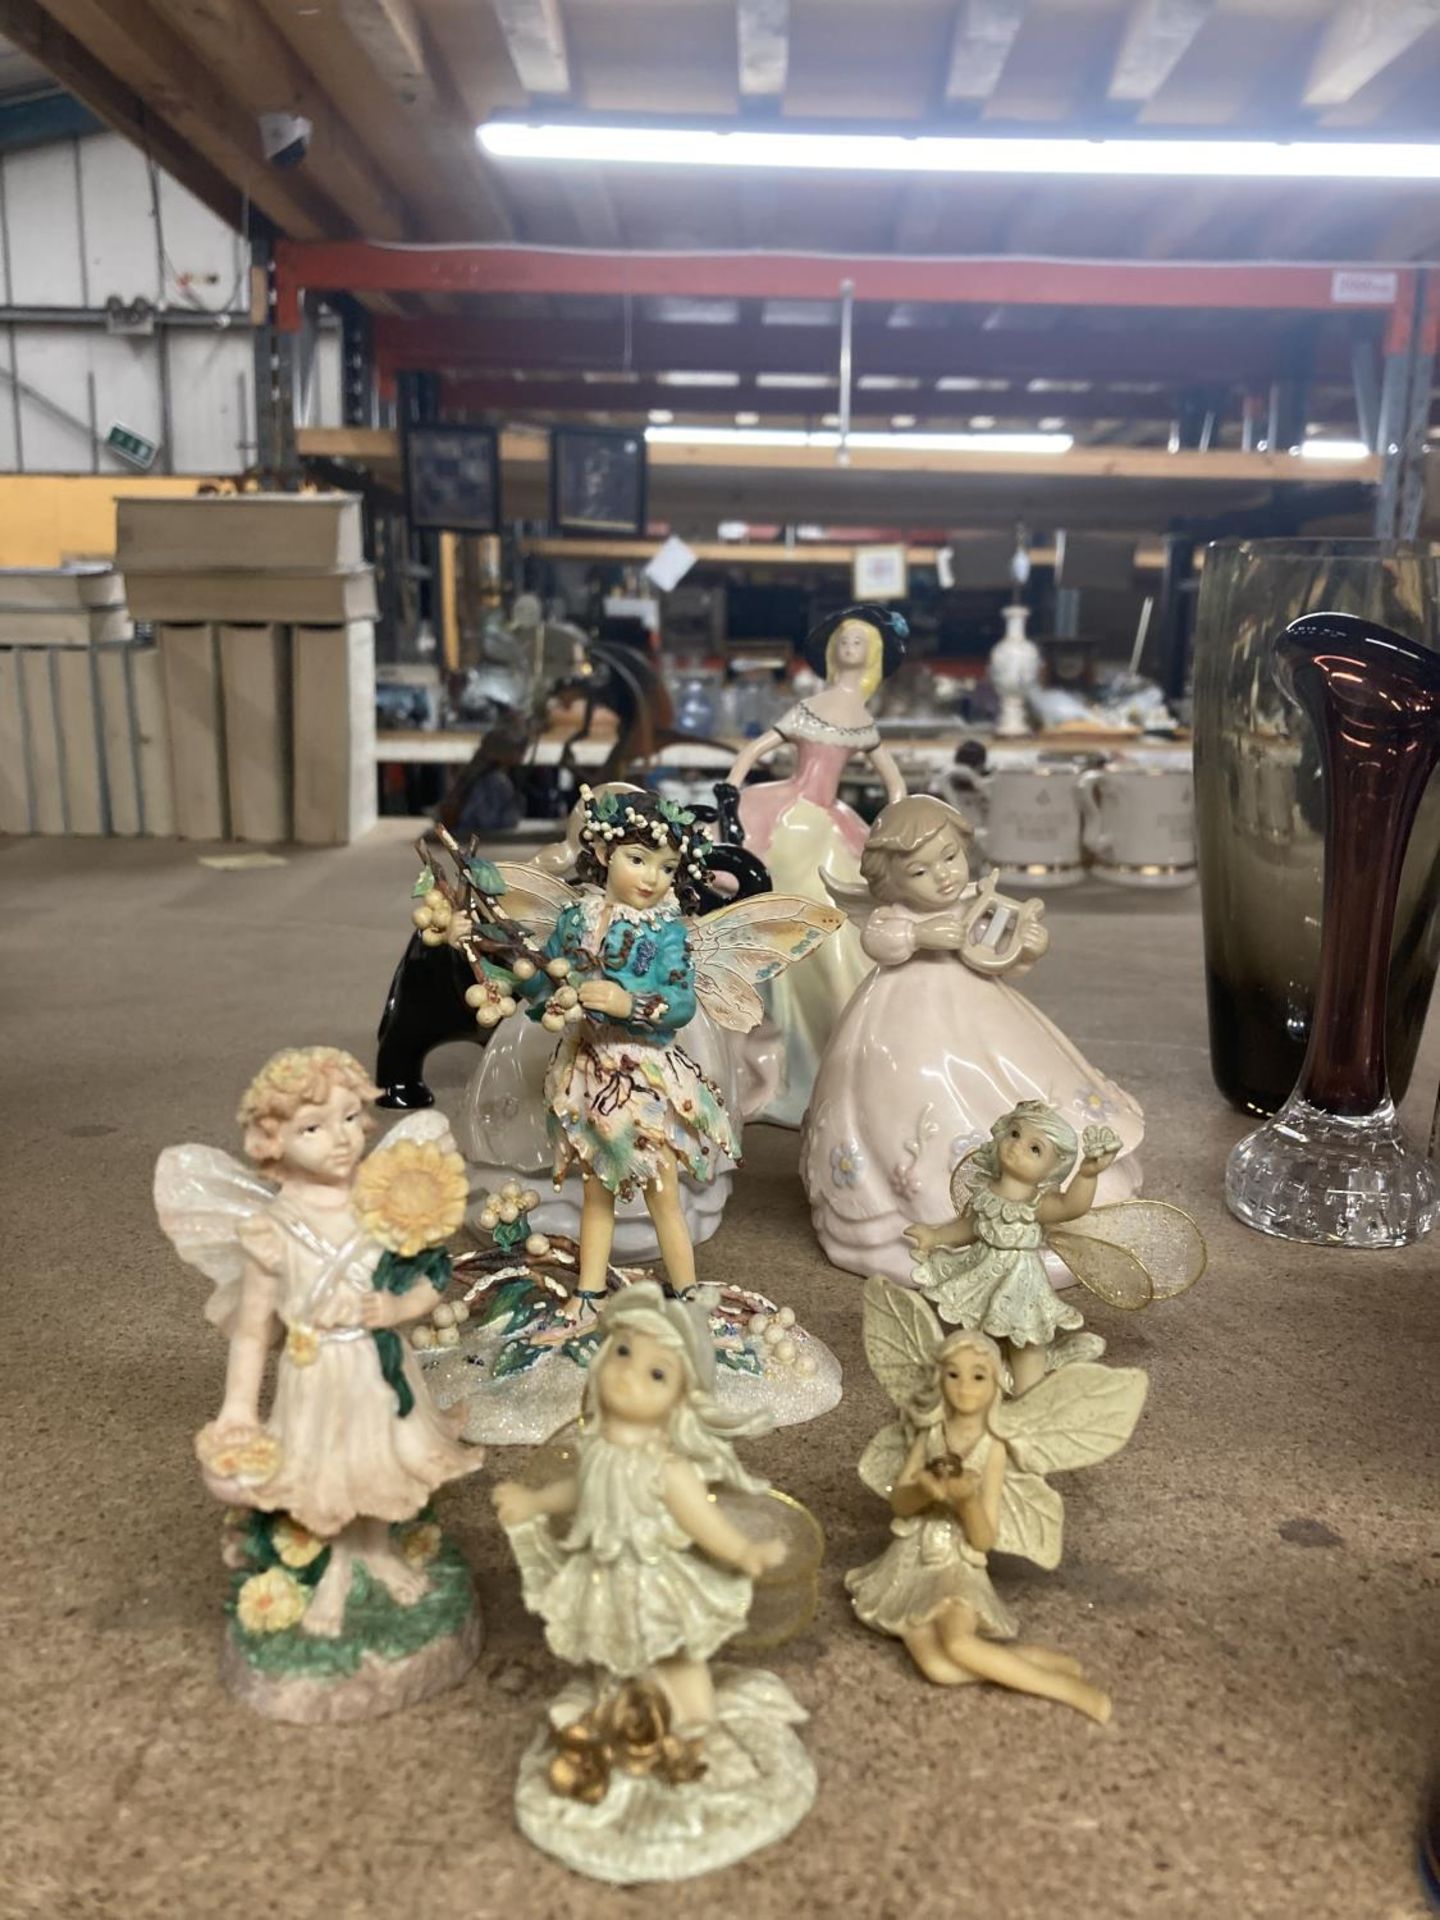 A QUANTITY OF CERAMIC ITEMS TO INCLUDE FAIRY FIGURINES, A VINTAGE LADY FIGURE AND AN ELEPHANT